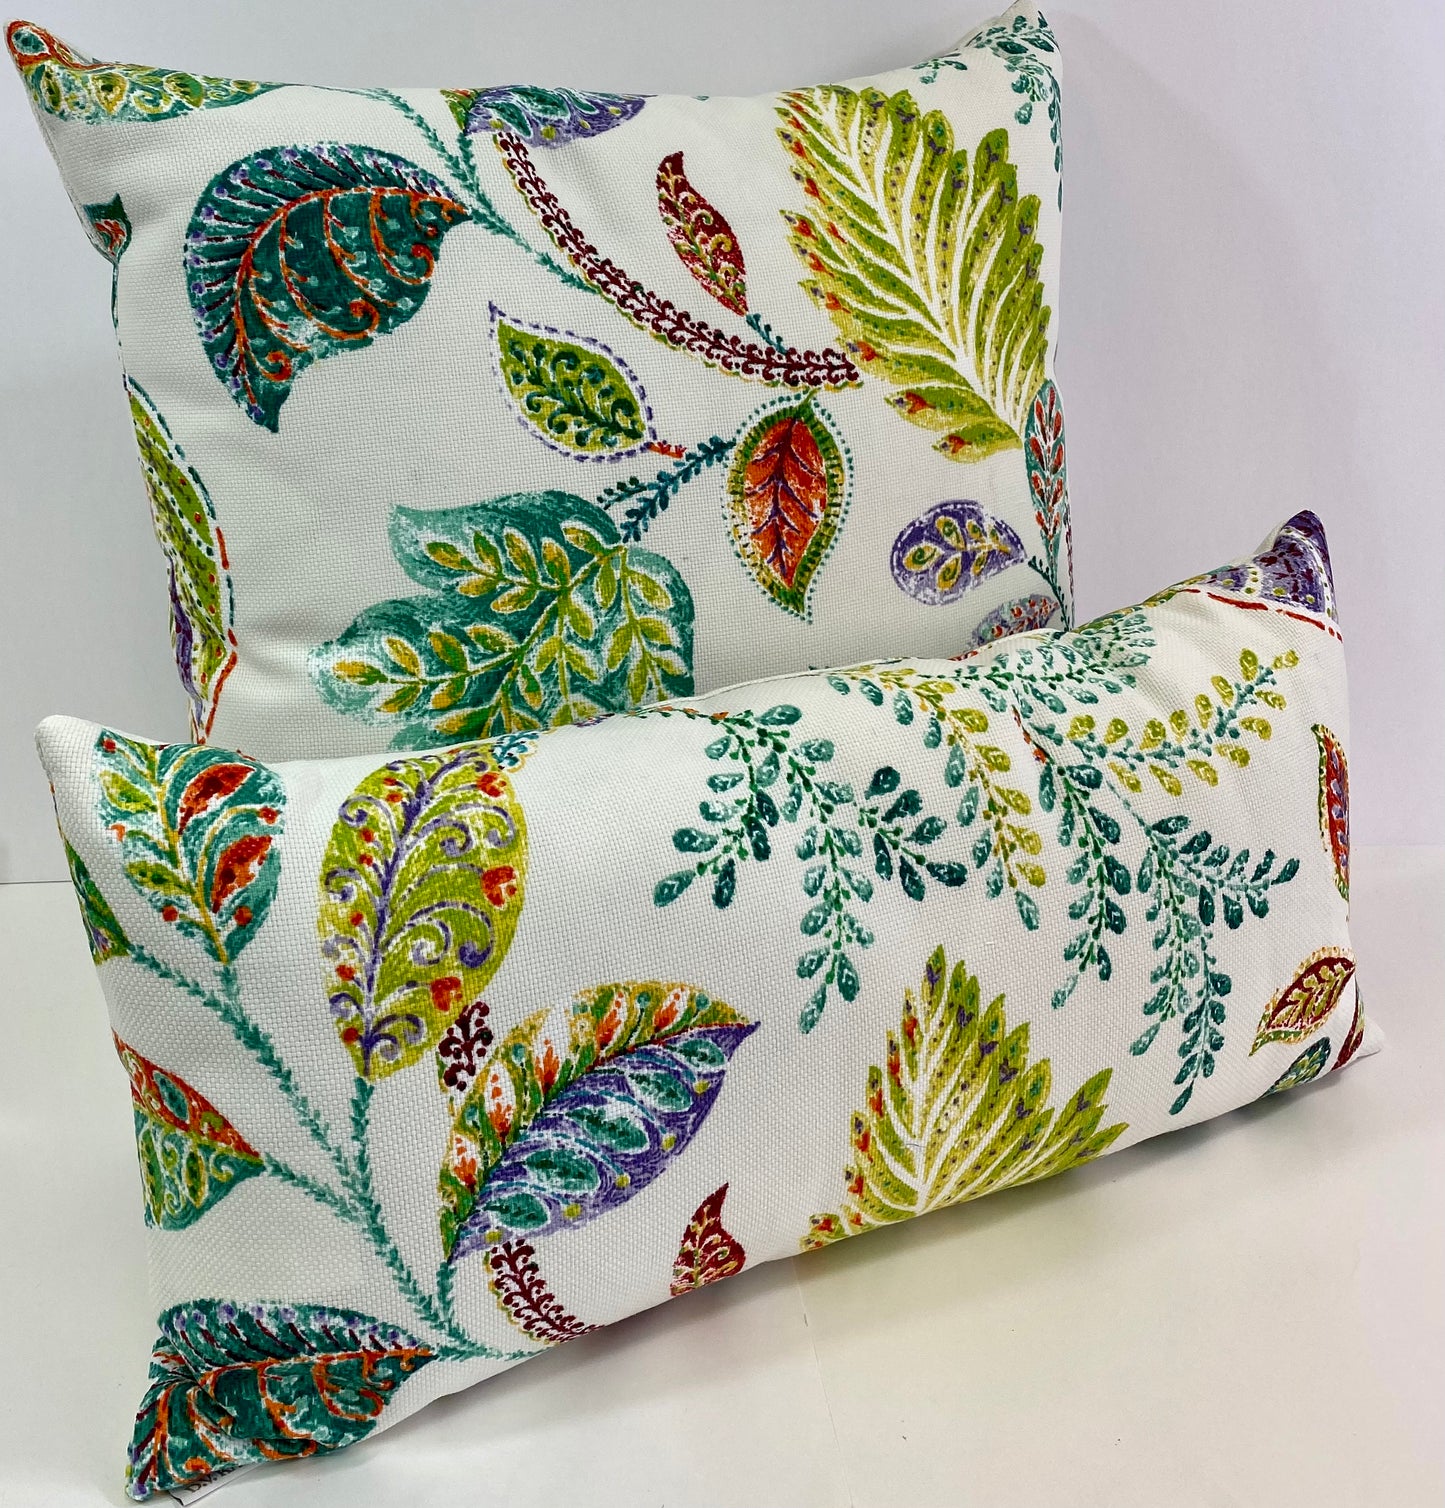 Luxury Outdoor Lumbar Pillow - 22" x 12" - Autumn Leaves; Sunbrella, or equivalent, fabric with fiber fill